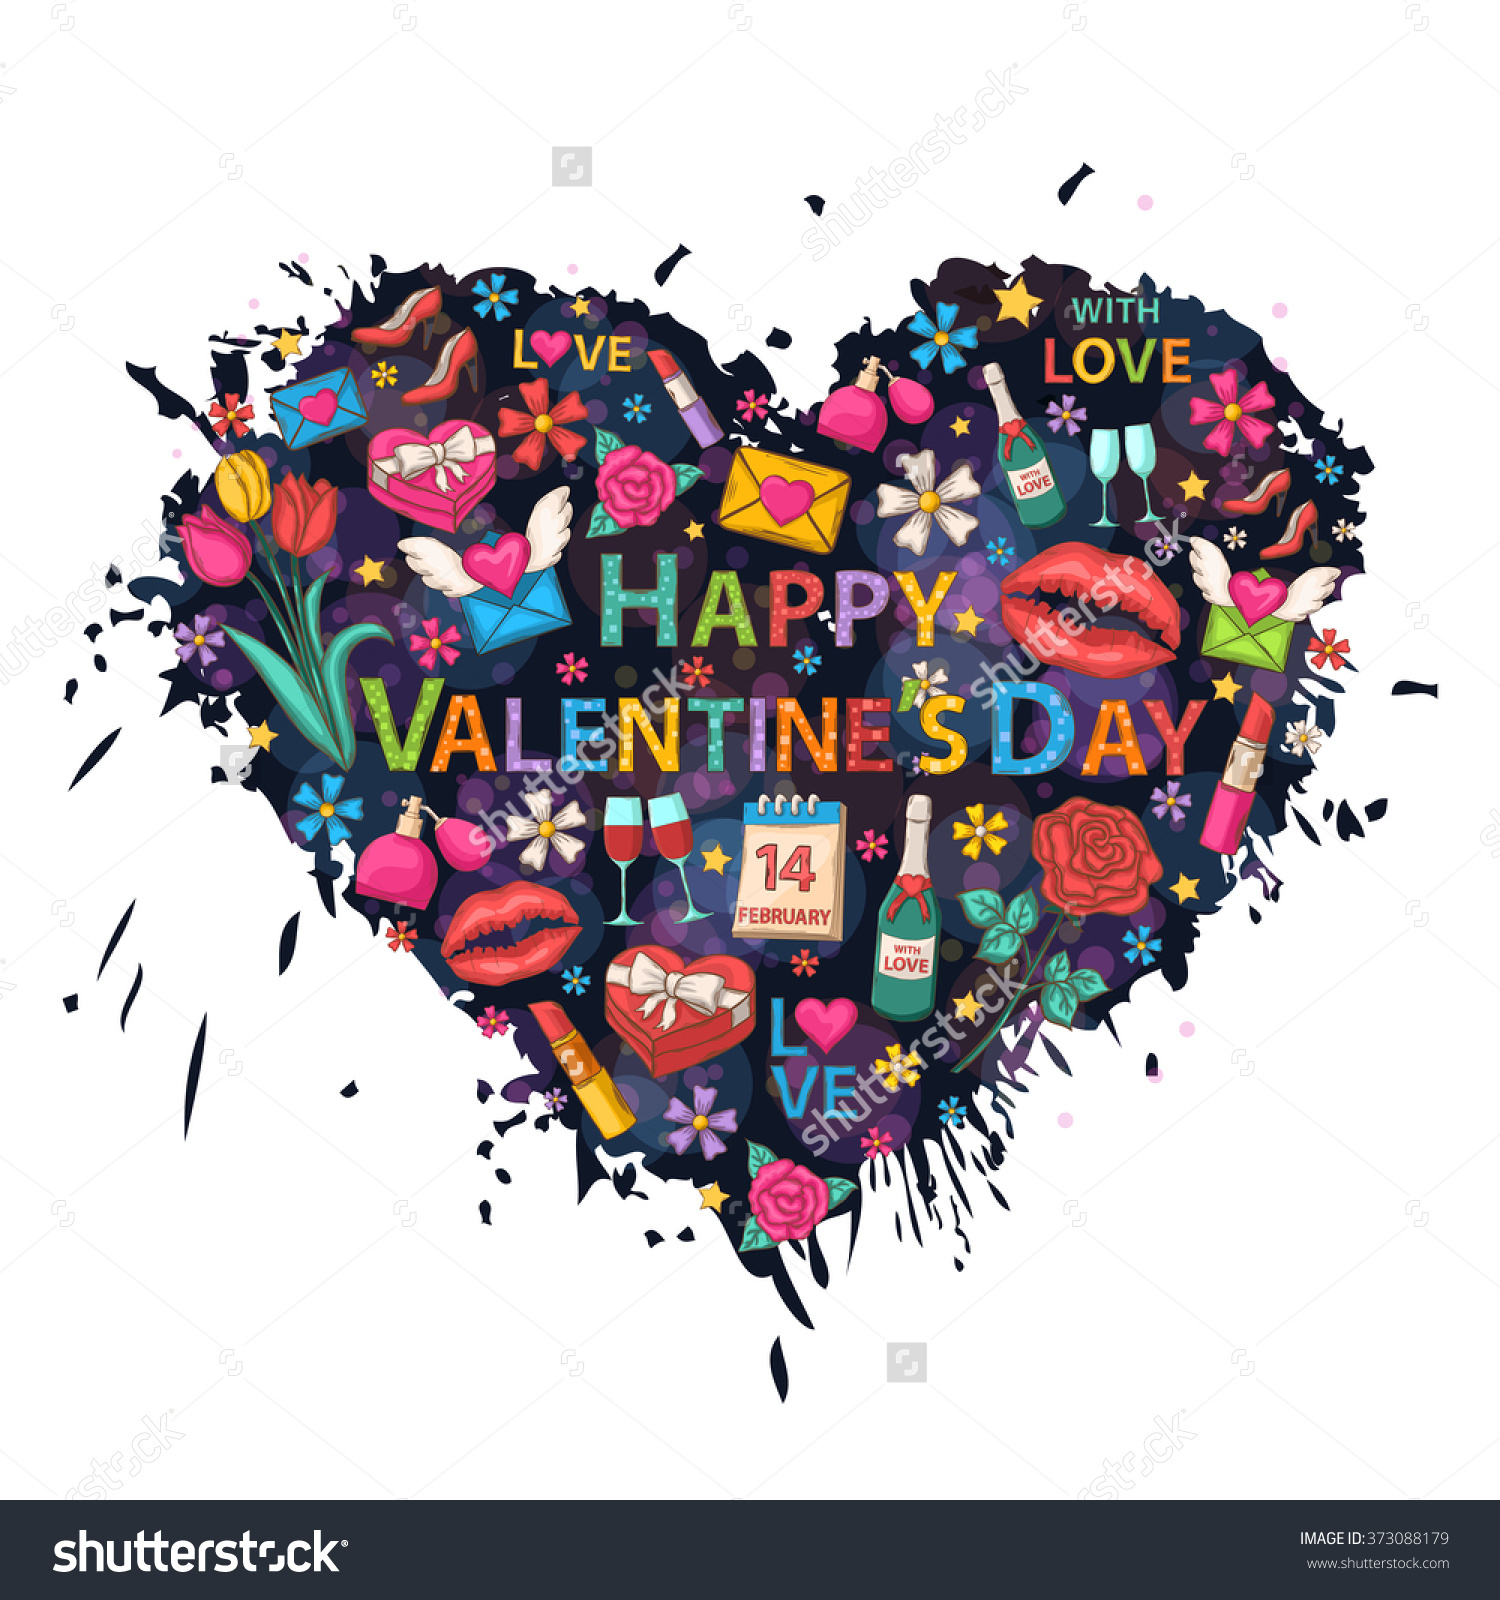 happy valentines day clipart flowers - Clipground1500 x 1600